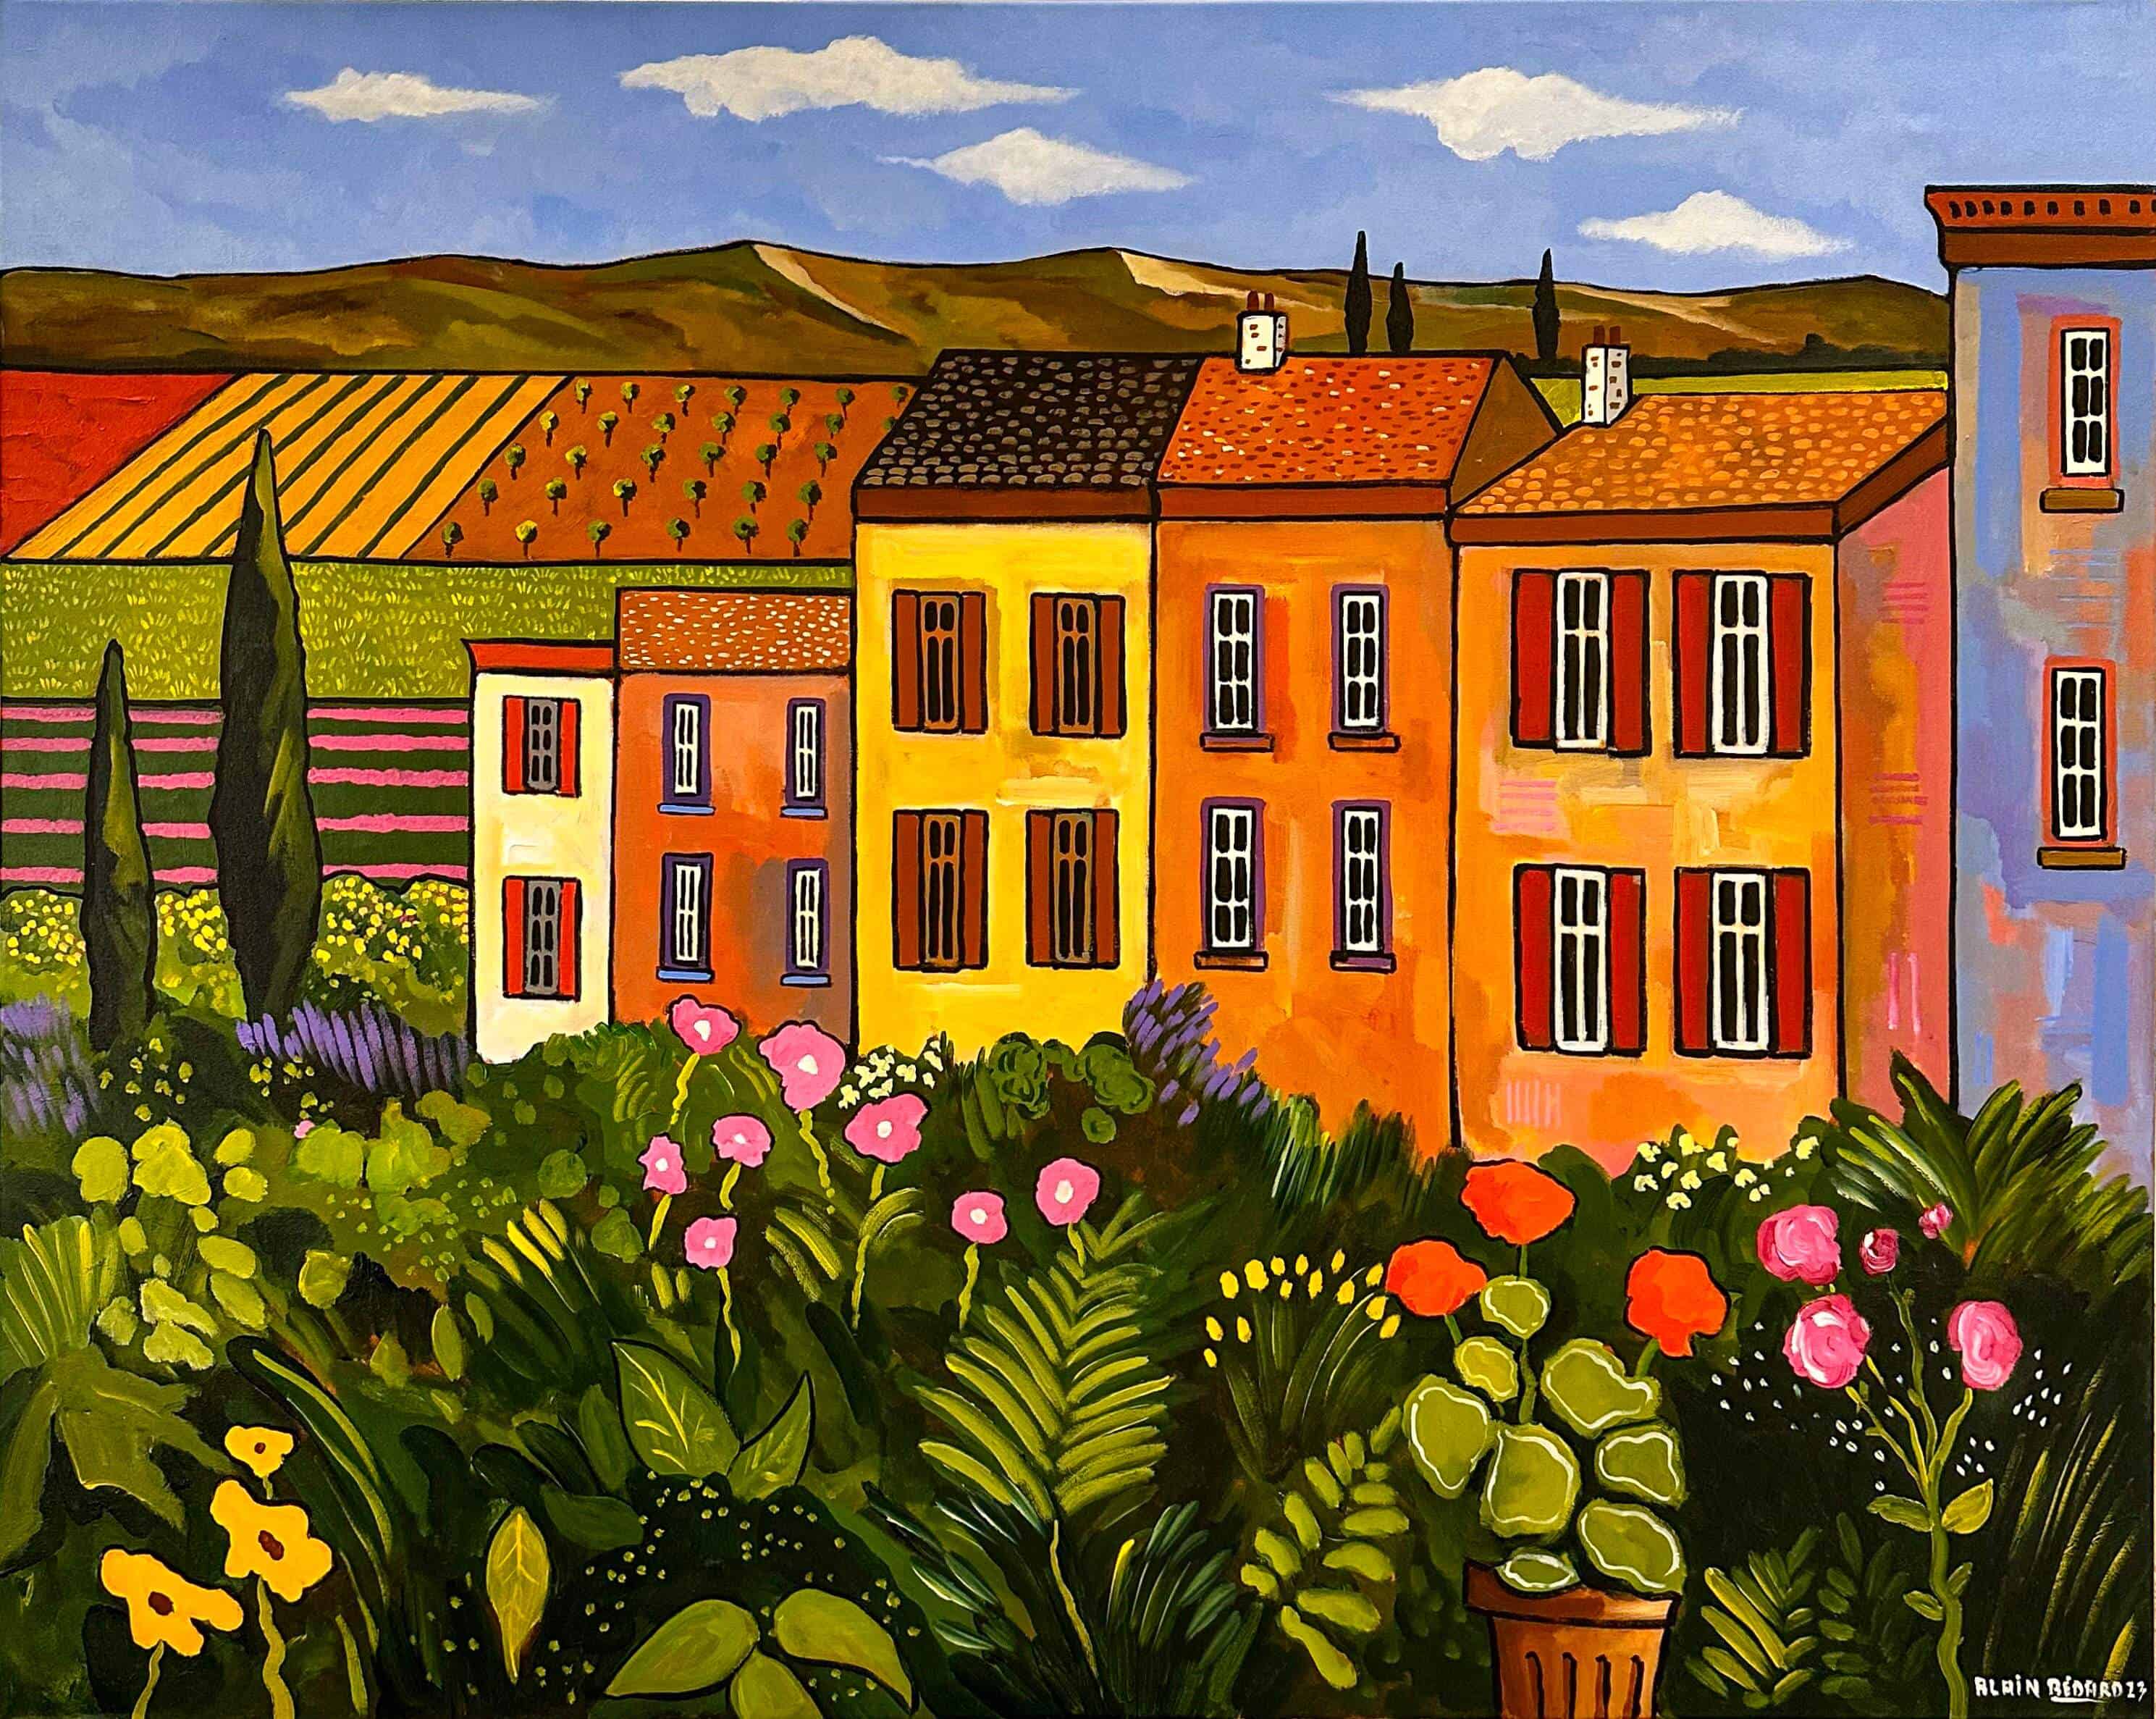 Contemporary Art. Title: The Valley, Acrylic on Canvas, 32 x 40 in by Canadian Artist Alain Bédard.